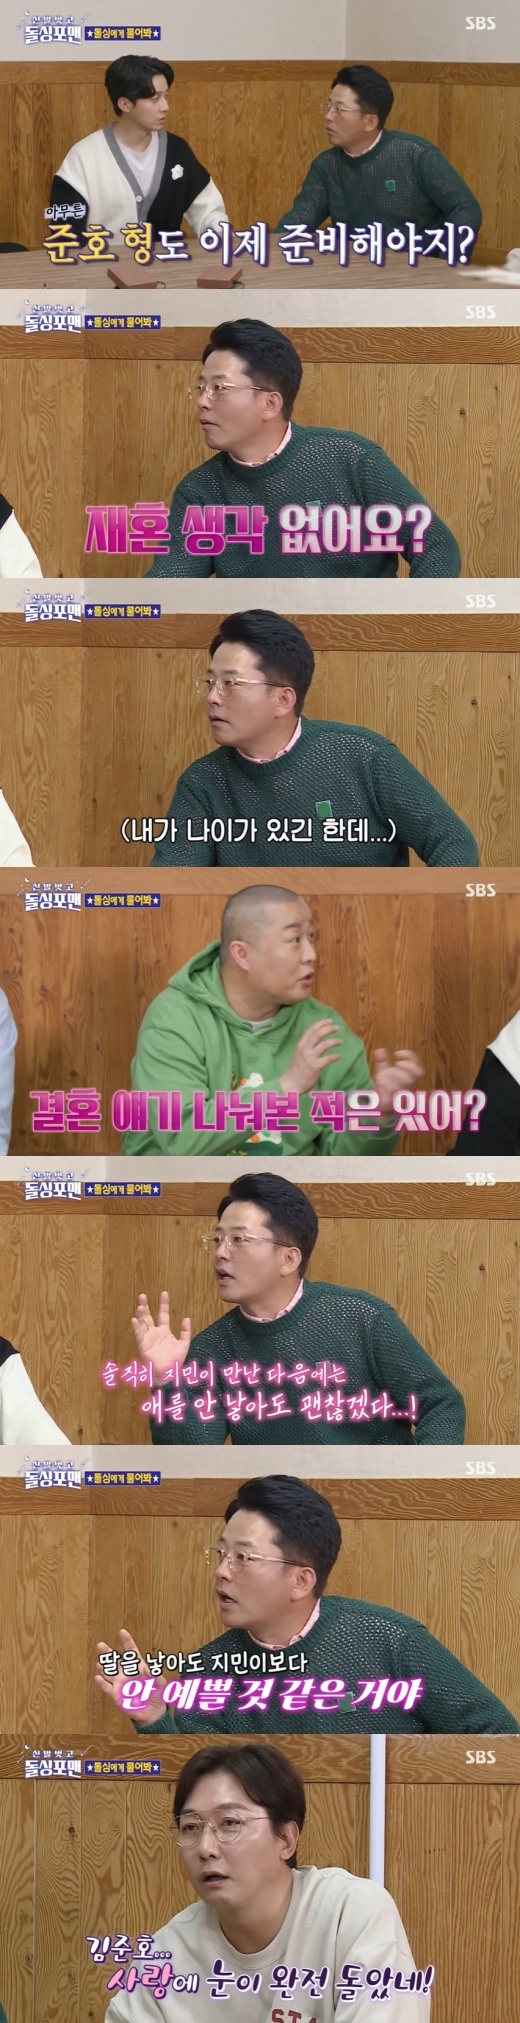 Comedian Kim Jun-ho flaunts affection for lover Kim Ji-minOn SBS Take off your shoes and dolsing foreman broadcasted on the night of the 26th, entertainment fighters Kim Dong-hyun, Heo Kyoung-hwan and Jeong Jun-ha appeared.The cast was interested in Kim Jun-ho, who recently started his devotion.When asked What would Kim Ji-min do if he asked me to break up first, Kim Jun-ho was convinced that why do you put shit on the beginning?But the cast, who did not know what to give up, started a big-time situation drama: Heo Kyoung-hwan, who turned into Kim Ji-min, said, My brother is too old and has a lot of opposition.I can not finish it at this point. Kim Jun-ho went out strongly, saying, Are you playing with me? But then he said, What do you do, Jimin? I was wrong.I will wear my eyes and wear it young. The dolsings and couples tikitaka continued: The 10th anniversary of the wedding, Jeong Jun-ha, said she was still thrilled and said: The child is so pretty.Everyone says that if they grow up, they are different, but they are still so cute. I have to prepare my brother, too, do not think about the second year, Heo Kyoung-hwan told Kim Jun-ho. Is not your brother more urgent?Have you ever talked about it? said Jeong Jun-ha.Kim Jun-ho said, I was 48 years old ... I originally thought I should have a child in life unconditionally. In fact, I honestly thought that after Jimin met, I would not have a child.Because even if I had a daughter, Jimin seemed to be worse than him. Tak Jae-hun, surprised by the unexpected answer, panicked, saying,  (on Kim Ji-min) my eyes are completely turned, and Lee Sang-min also said, Wow that comment?I was surprised.In particular, Kim Jun-ho also revealed the operation of the ptosis.Kim Ji-min said at first, Dont do an ophthalmologic surgery because your good eyes would look so strong, he said.On the operating table, he was drunk with sleep anesthetic and muttered, Jimin loves you.After the surgery, Kim Jun-ho asked, Do you think youre handsome? The eyelids were slightly raised, making you look forward to seeing the swelling after the swelling.Meanwhile, Kim Jun-ho and Kim Ji-min, who are seniors and juniors, officially acknowledged their devotion on March 3.